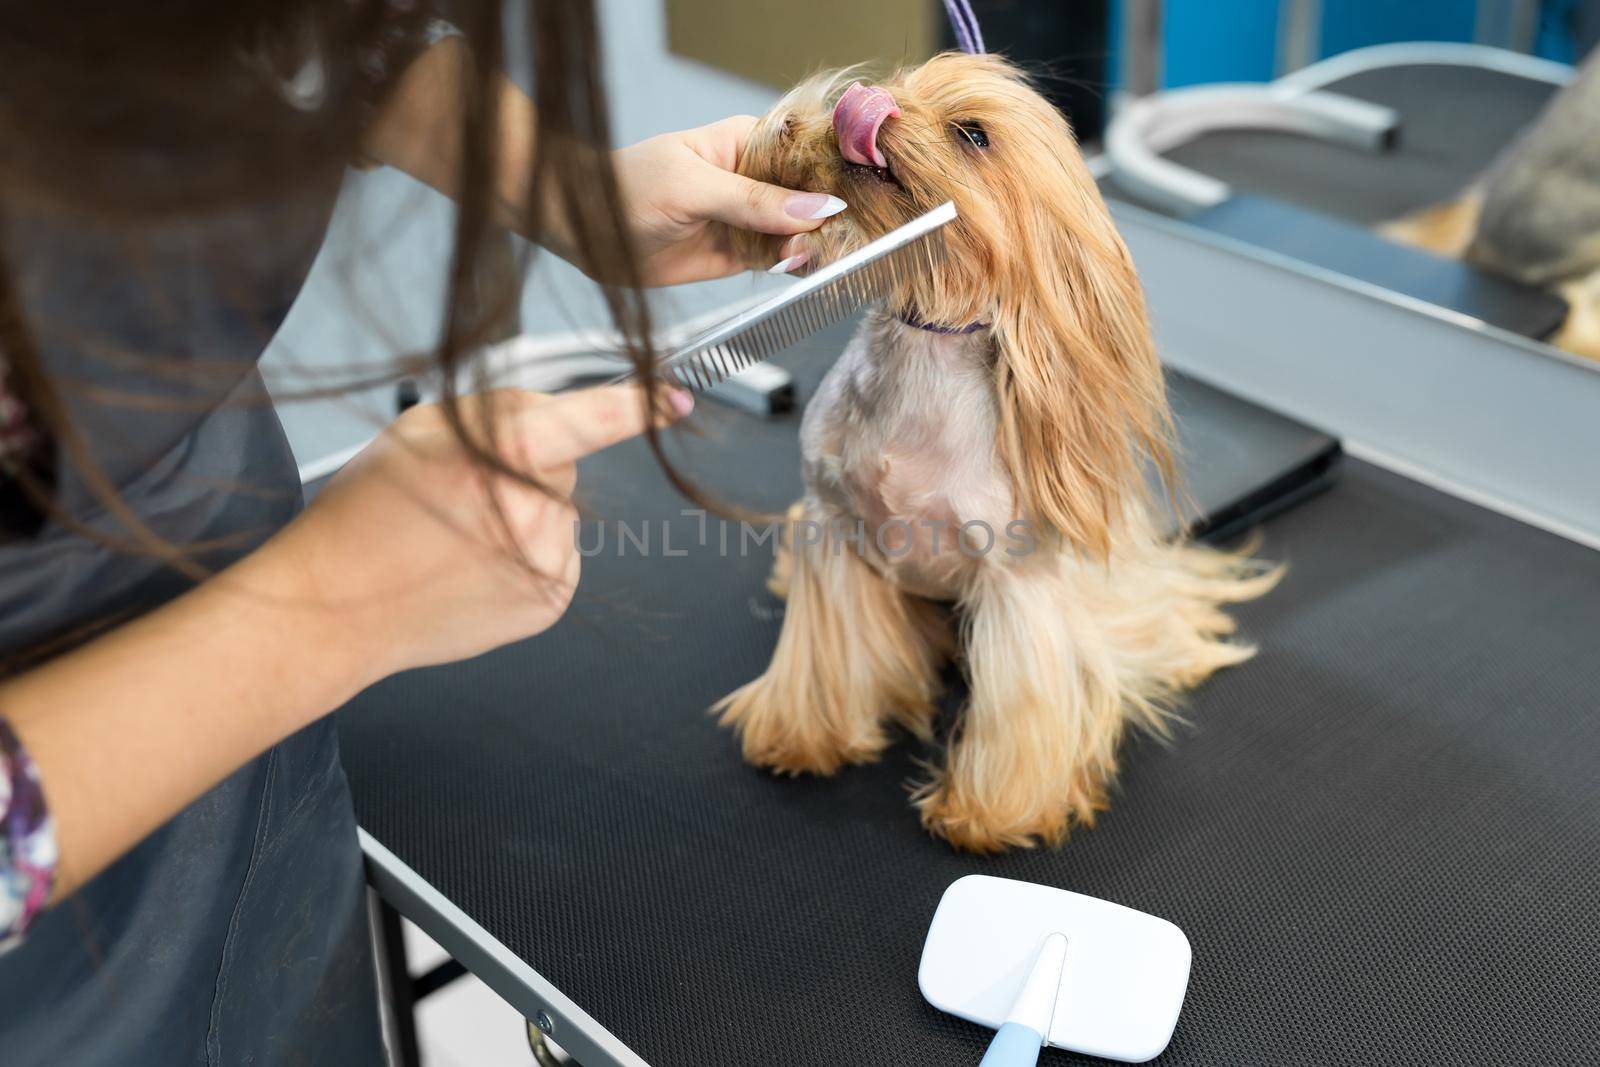 Grooming animals, grooming, drying and styling dogs, combing wool. Grooming master cuts and shaves, cares for a dog. Beautiful Yorkshire Terrier. by StudioPeace